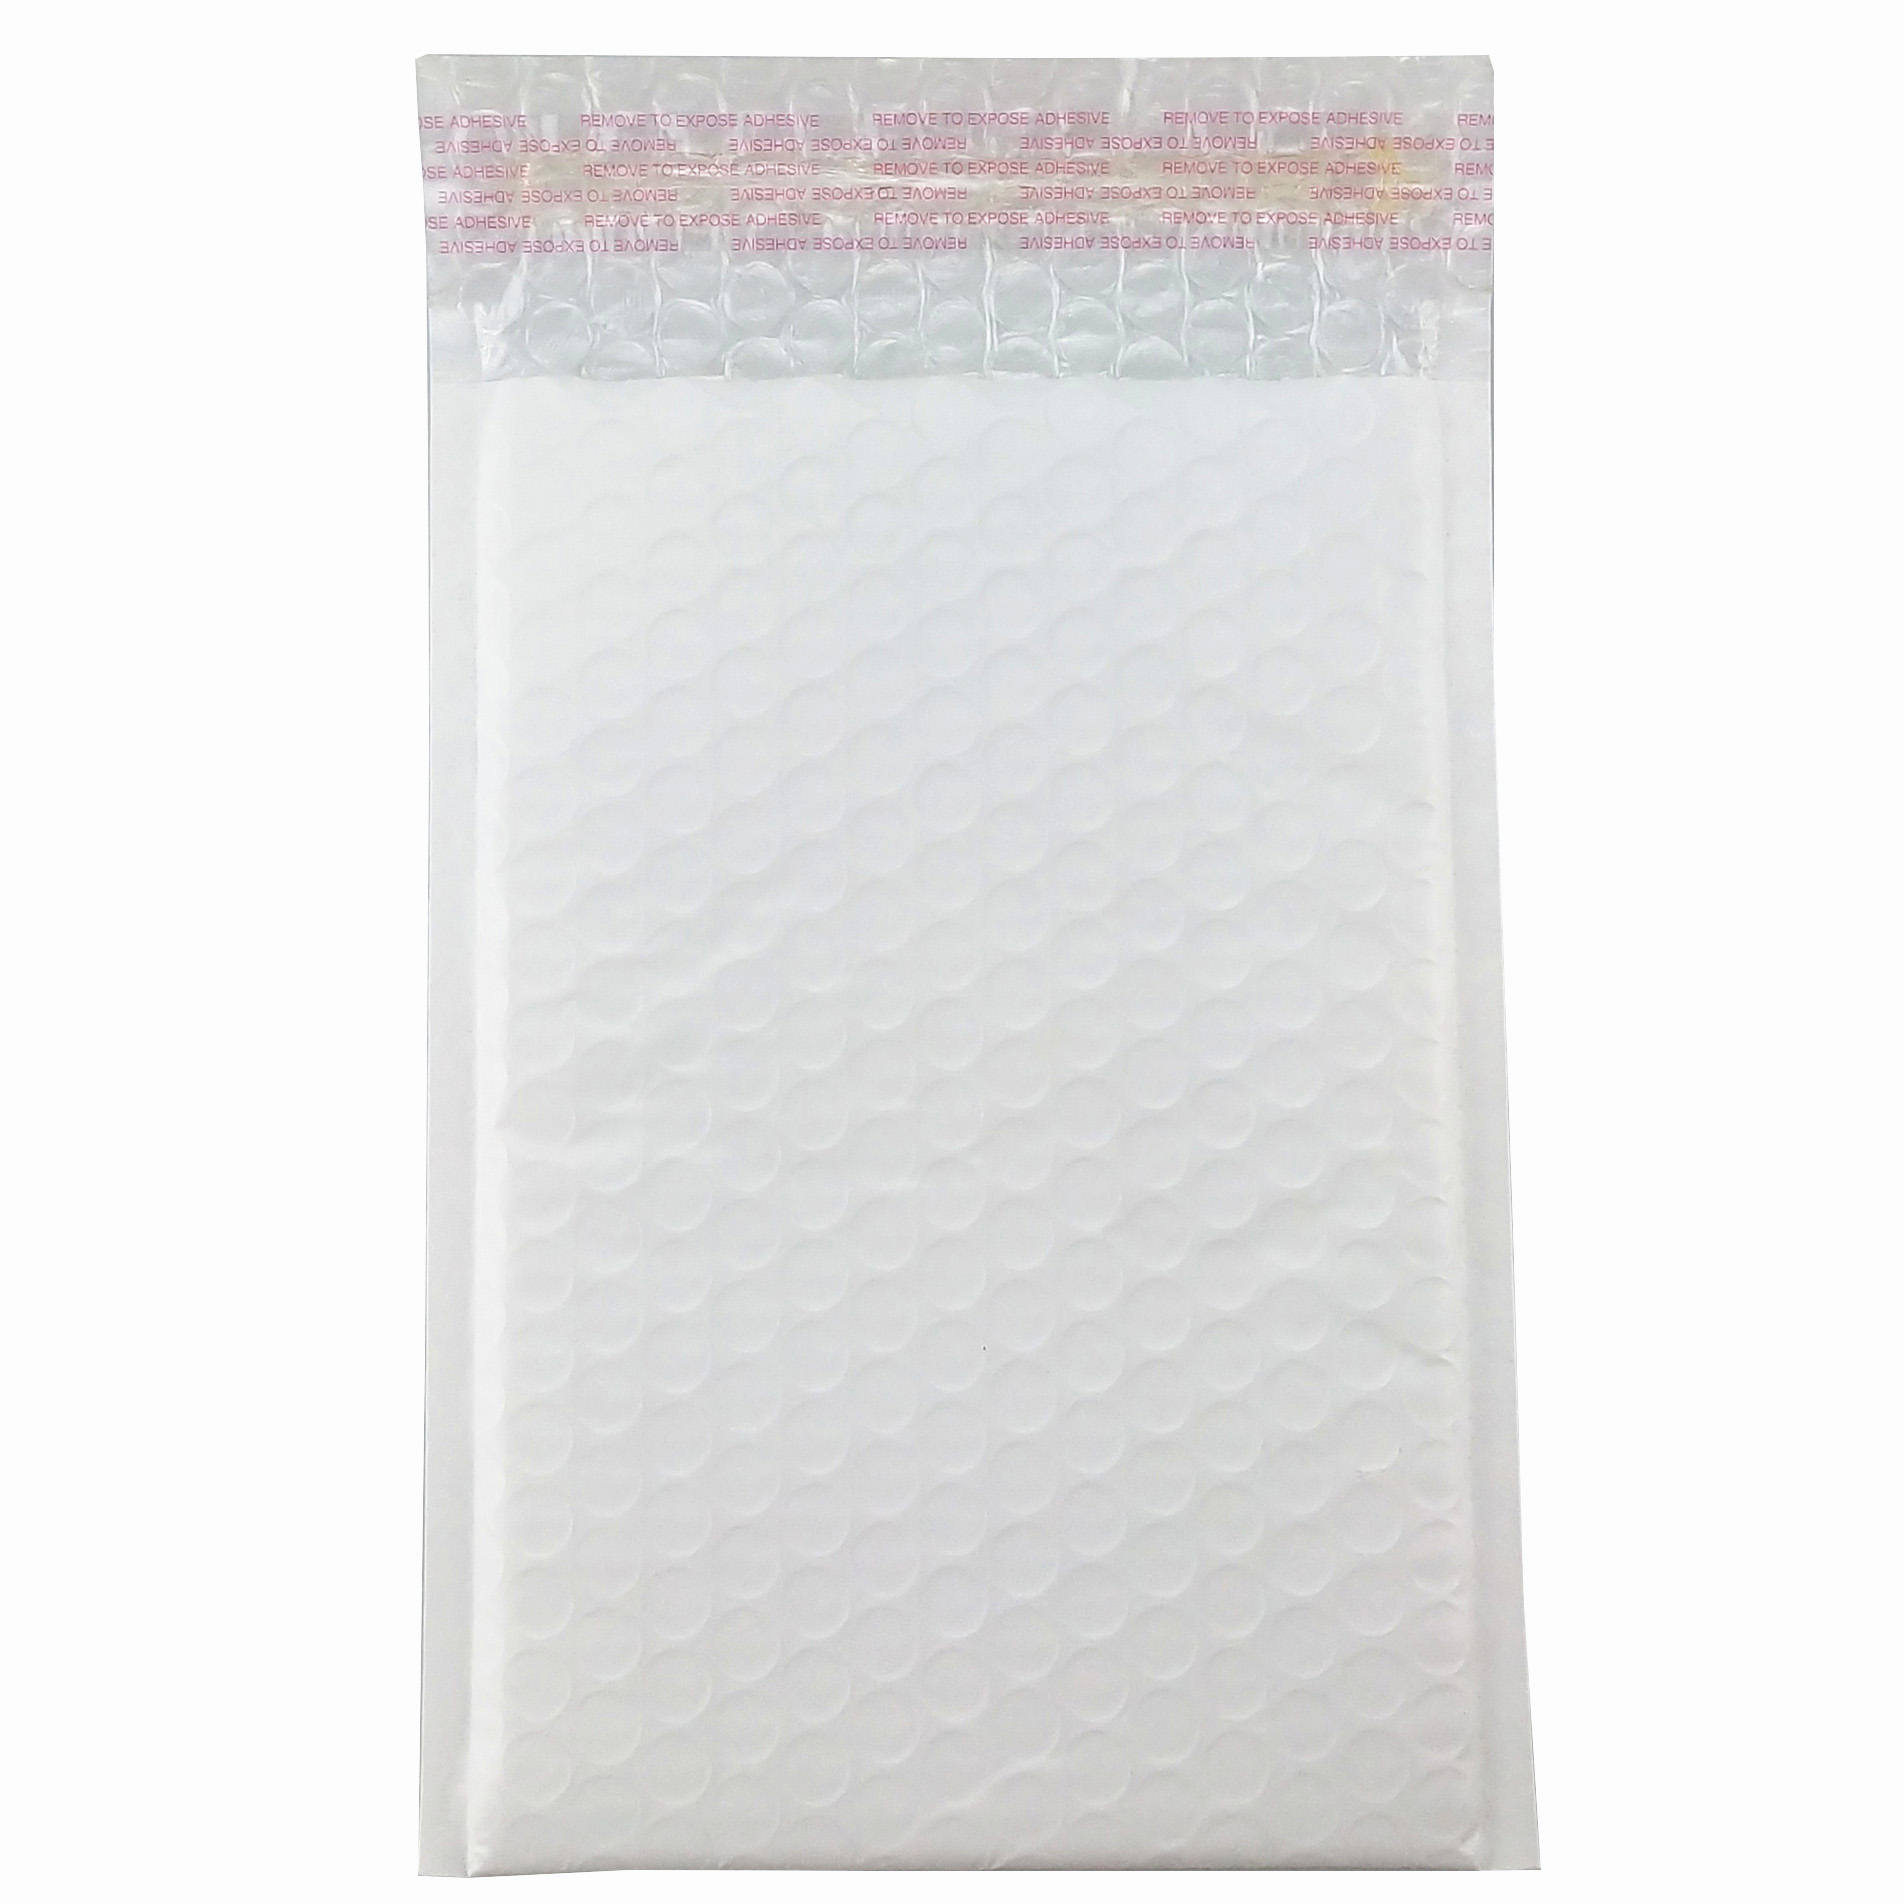 White poly bubble mailers